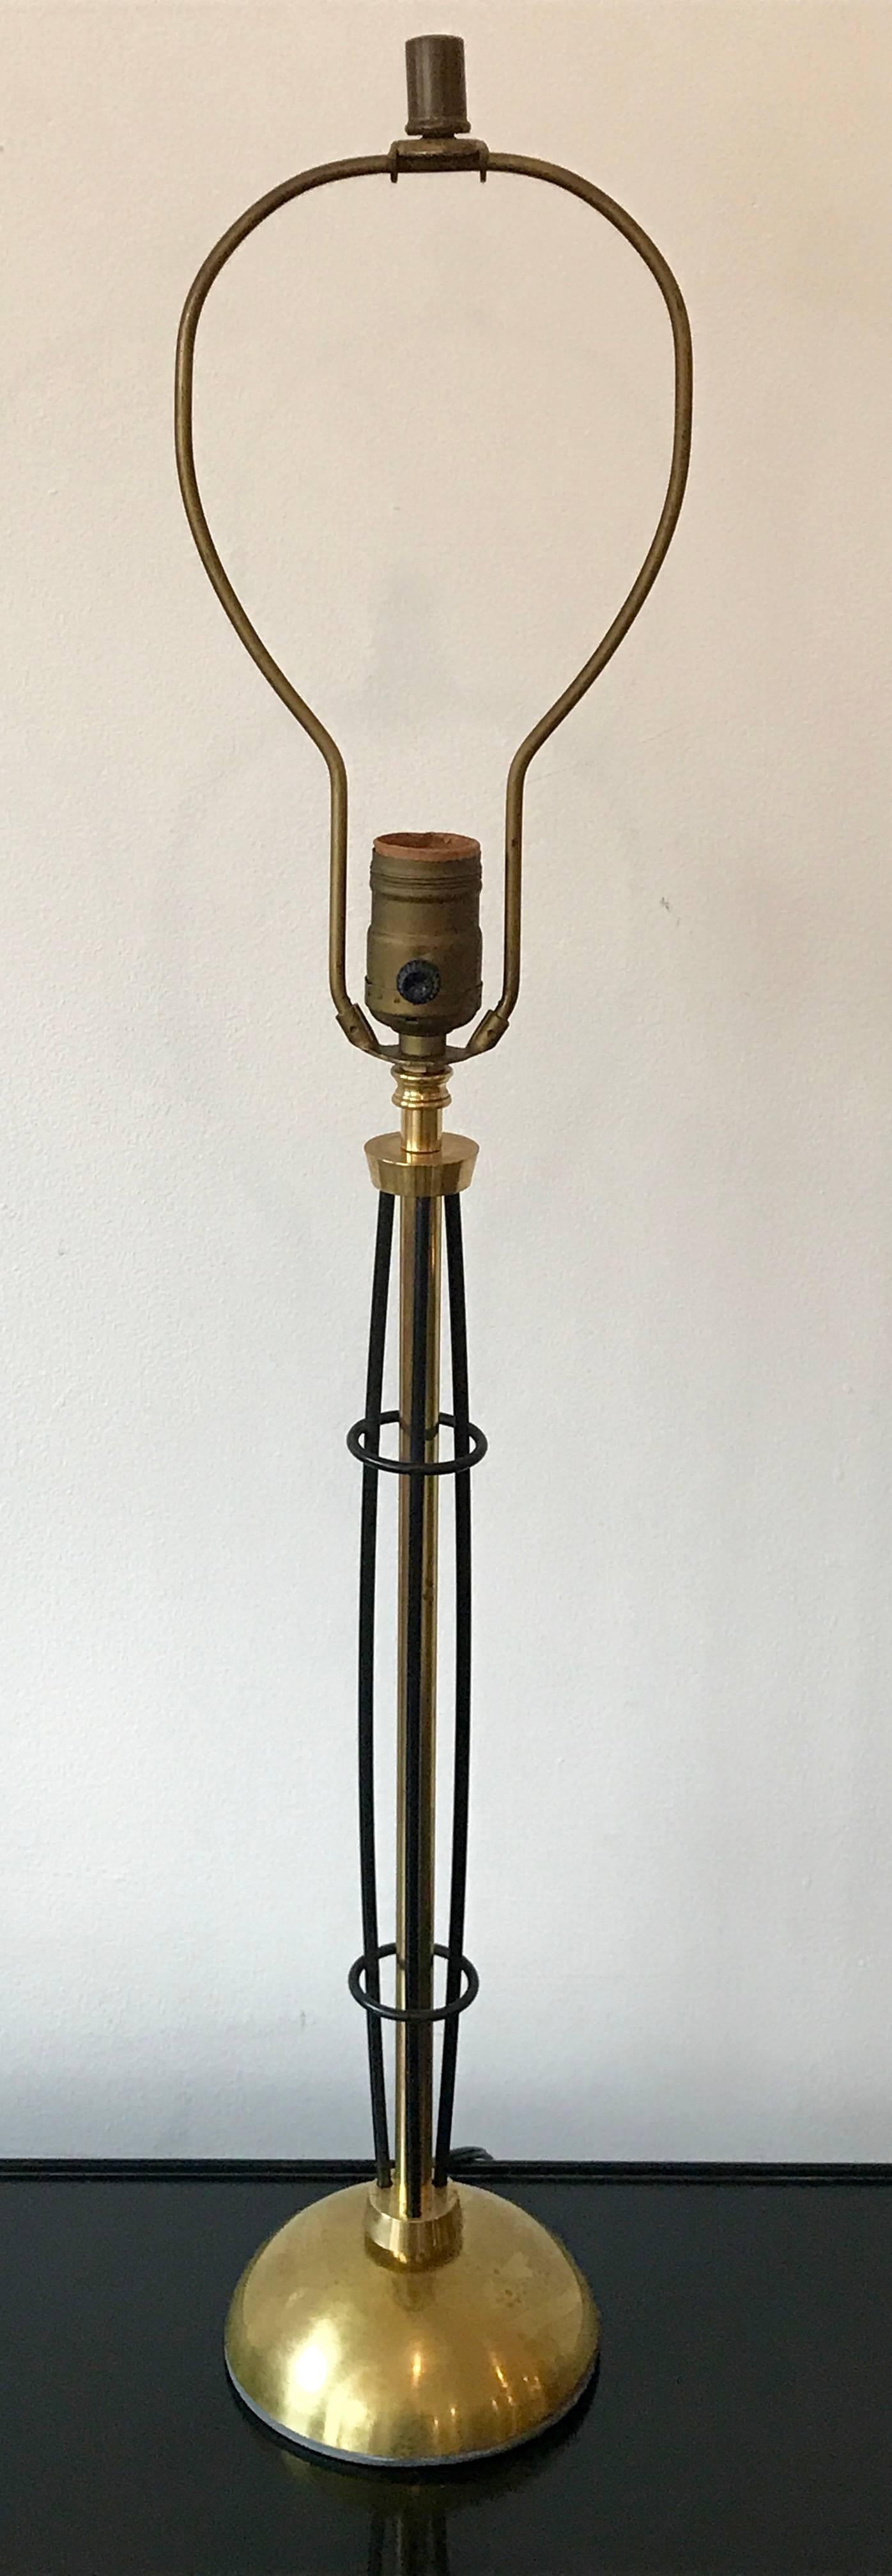 Mid-Century Modern Industrial Brass and Wrought Iron Table Lamp, 1950's For Sale 1